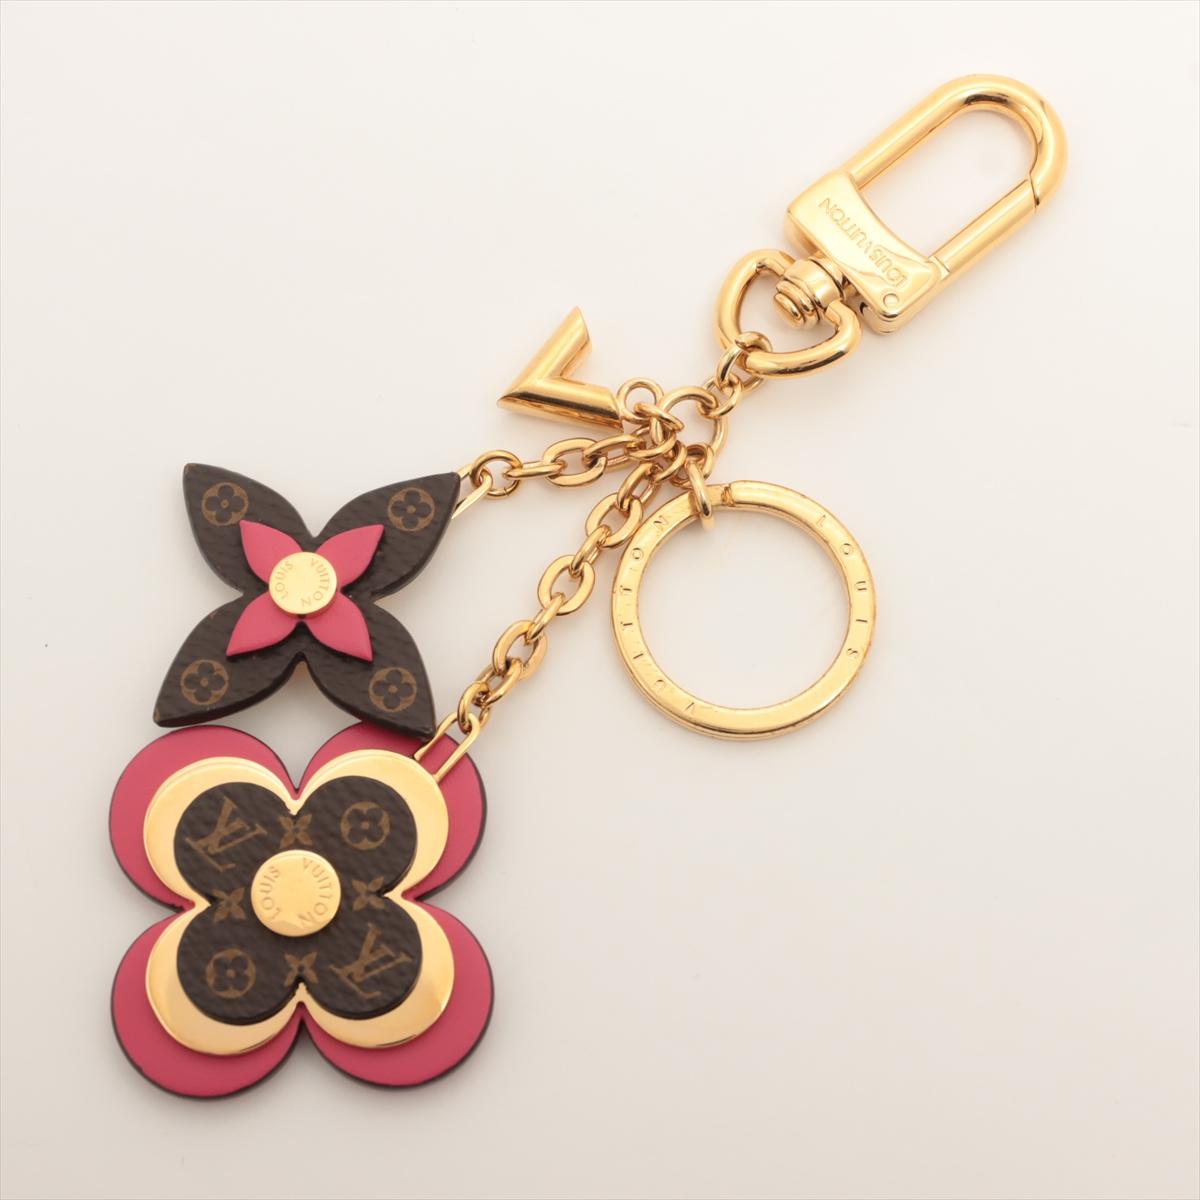 The Louis Vuitton Monogram Blooming Flowers Bag Charm a captivating and feminine accessory that adds a touch of nature's beauty to your Louis Vuitton bag. Meticulously crafted, the bag charm features delicately crafted monogram flowers in vibrant